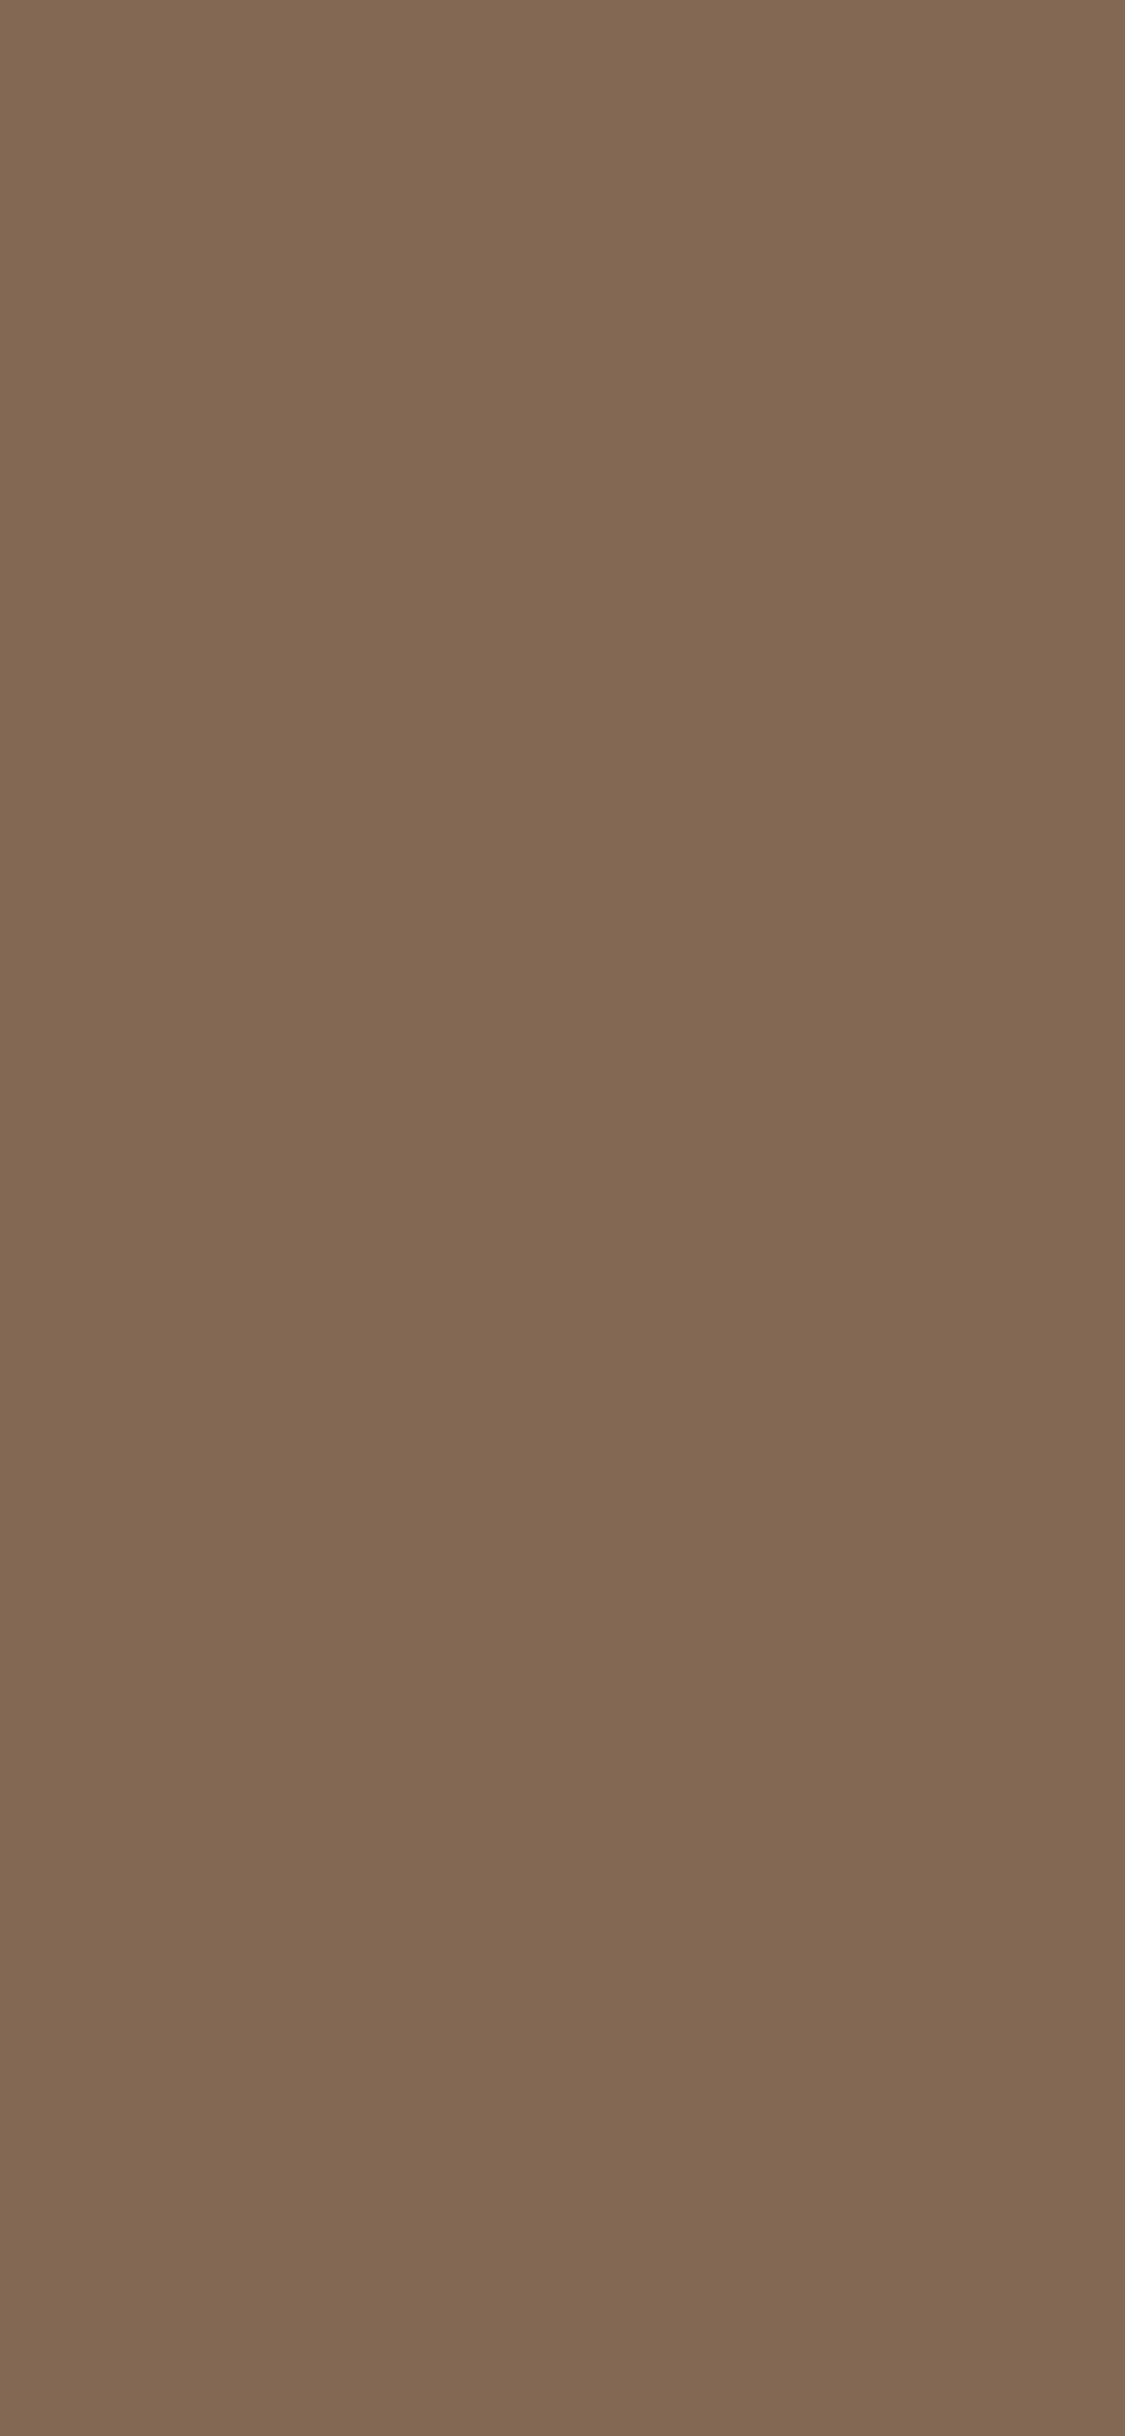 1125x2436 Pastel Brown Solid Color Background